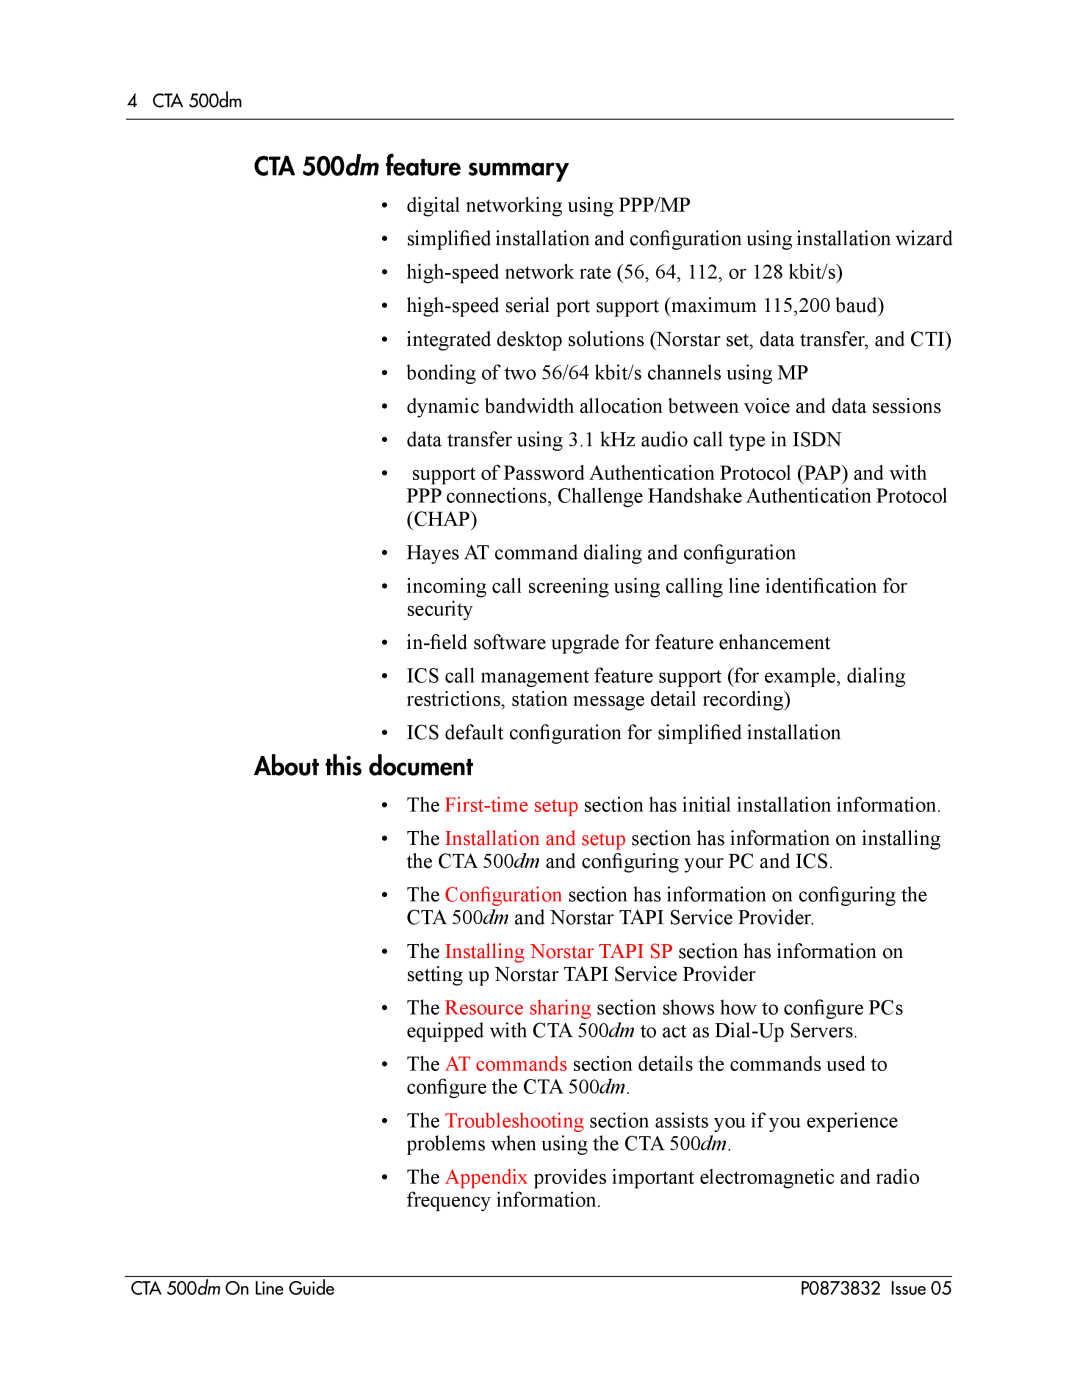 Nortel Networks manual CTA 500dm feature summary, About this document 